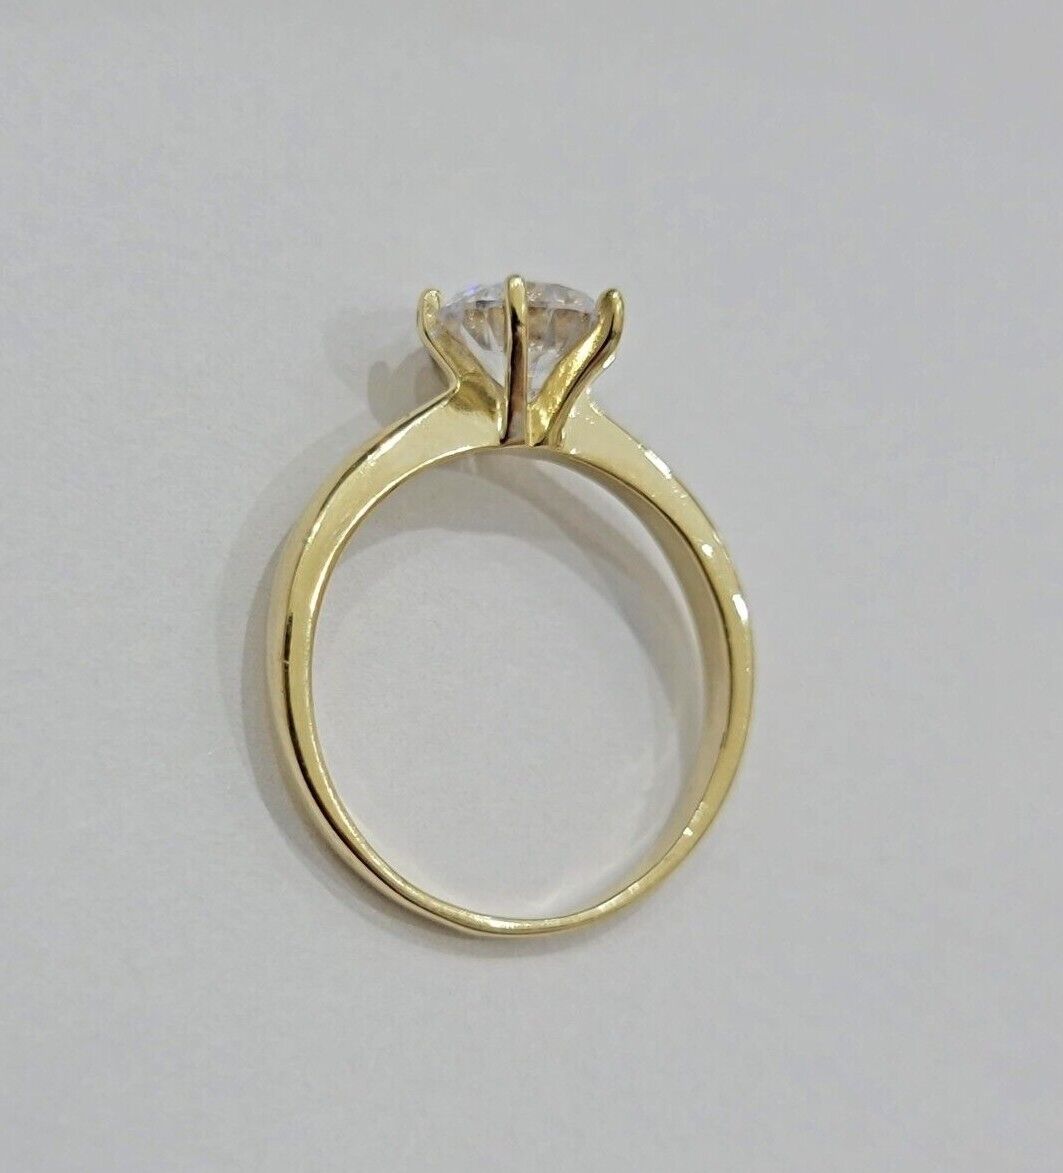 10k Yellow Gold Ladies Solitaire Ring For Womens Casual Band SALE Real Brand New